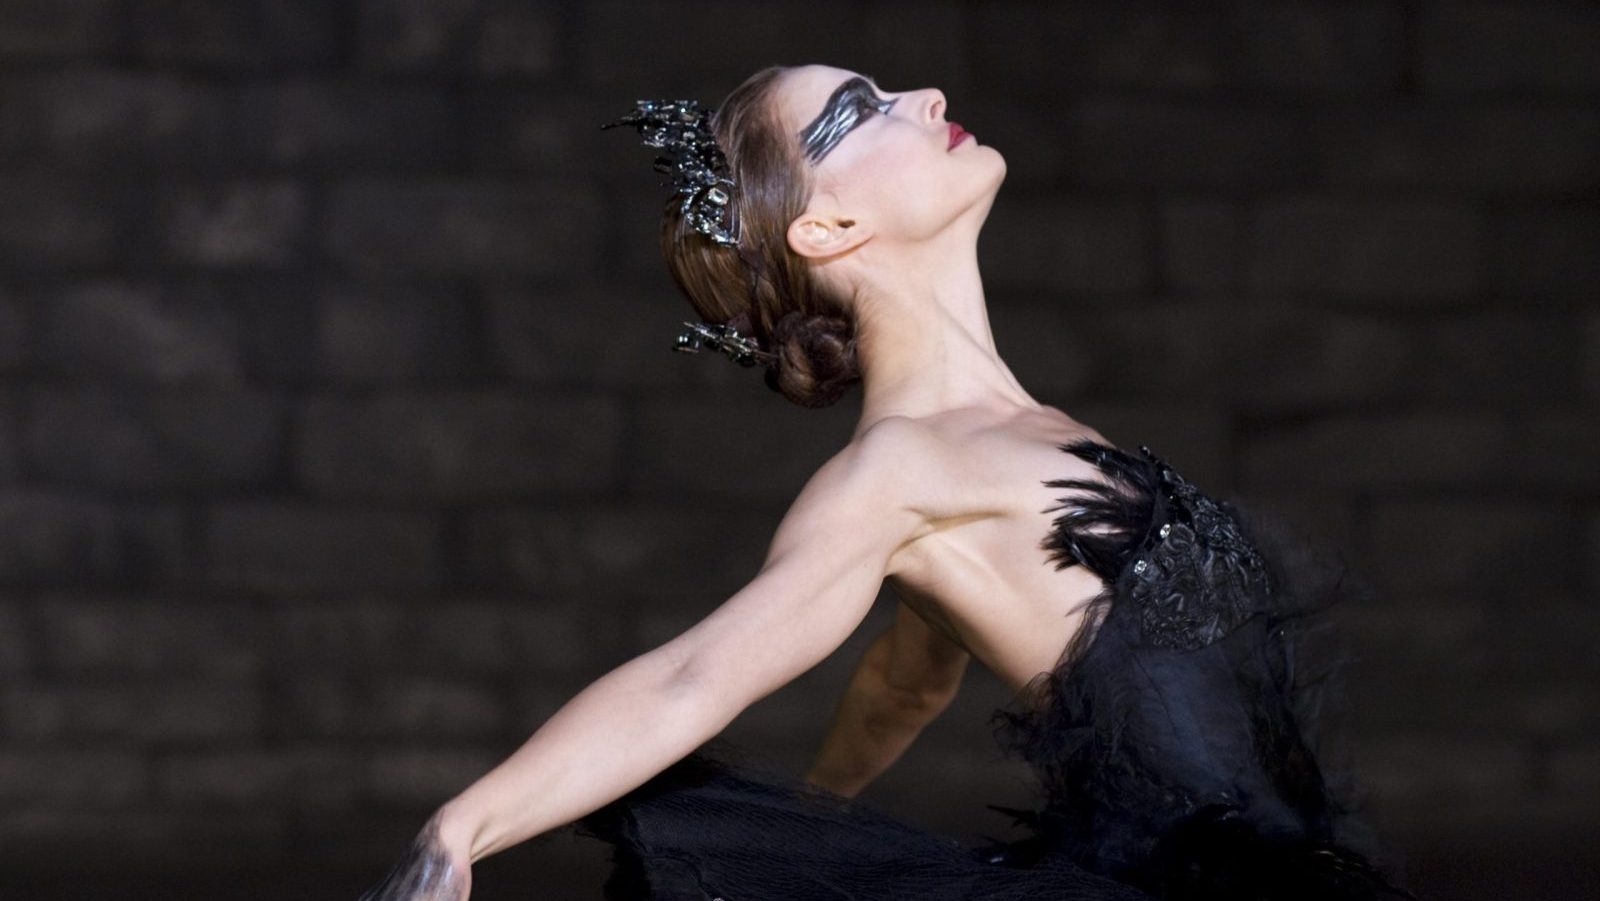 <p>In <em>Black Swan</em>, Nina (Natalie Portman) is cast in the ballet <em>Swan Lake</em> for the double role of white swan and black swan. But while Nina embodies Odette, the innocent white swan, perfectly, there’s something lacking in her performance of Odile, the black swan. But then a new dancer joins the company, and she embodies the black swan perfectly. Nina finds herself competing to keep her role portraying the black and white swans, and her attempt to <em>become</em> the black swan as she does the white leads her into madness.</p>